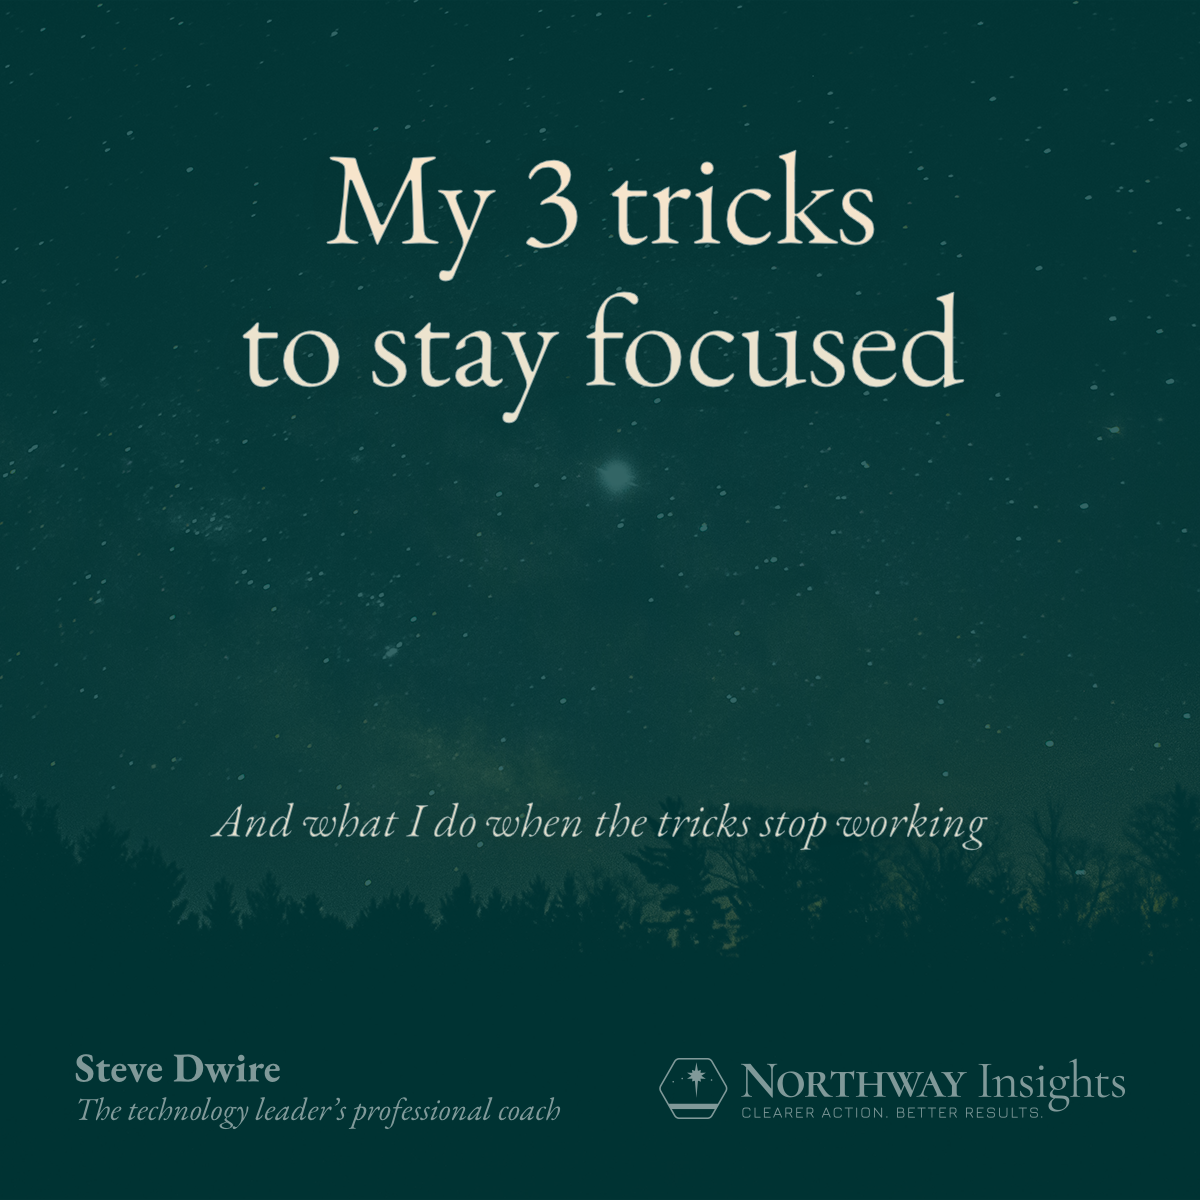 My 3 tricks to stay focused